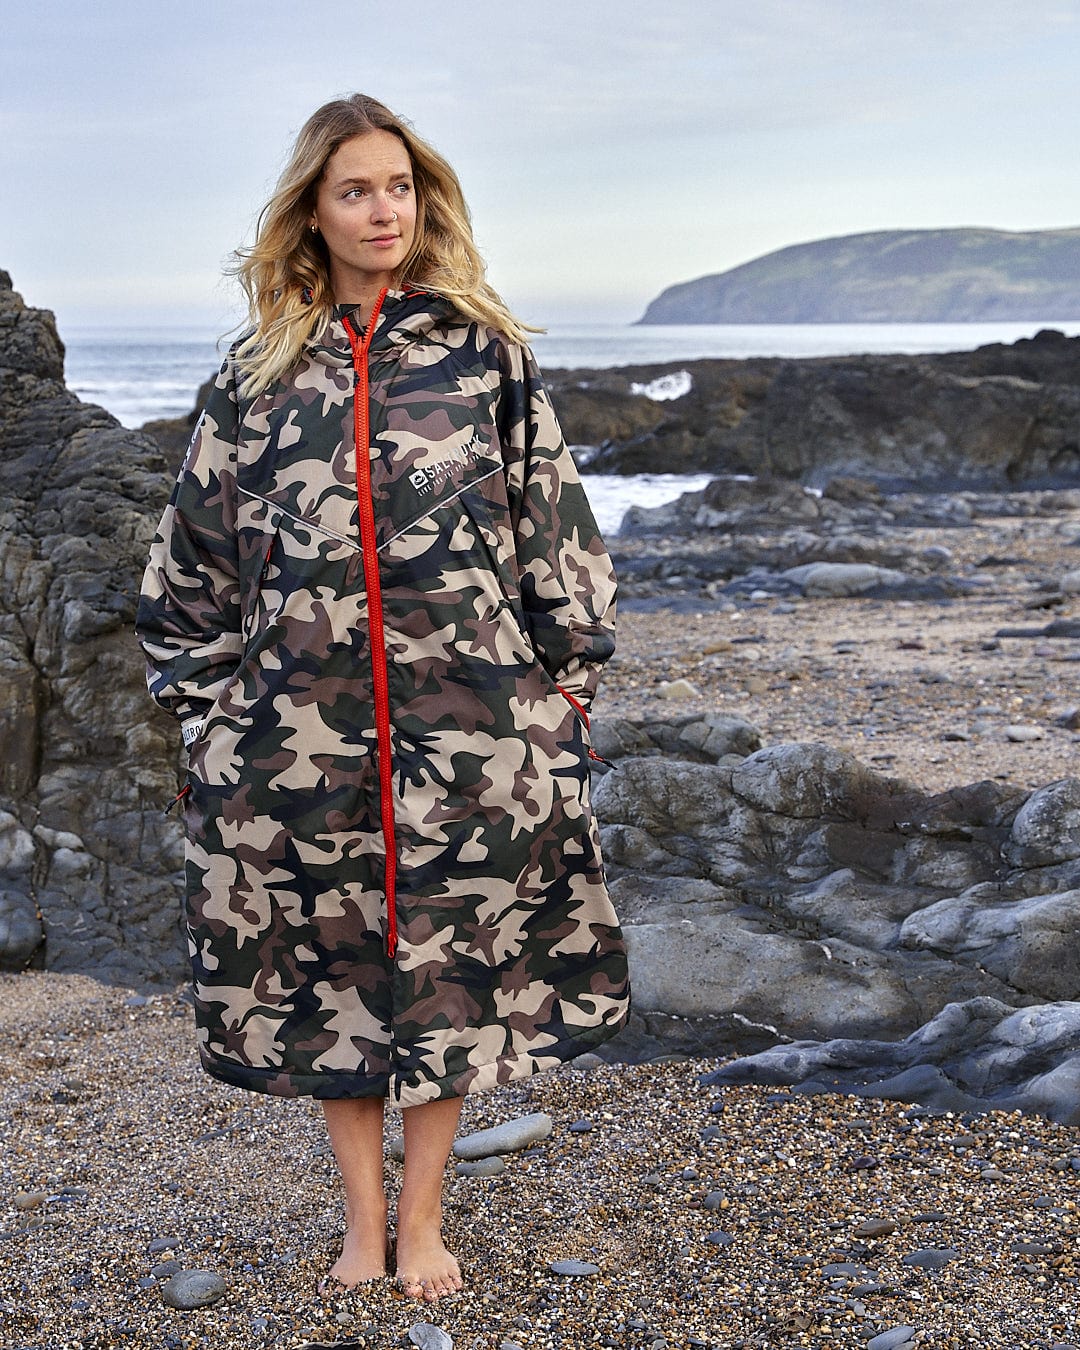 A woman in a Four Seasons - Waterproof Changing Robe - Brown by Saltrock standing on a beach.